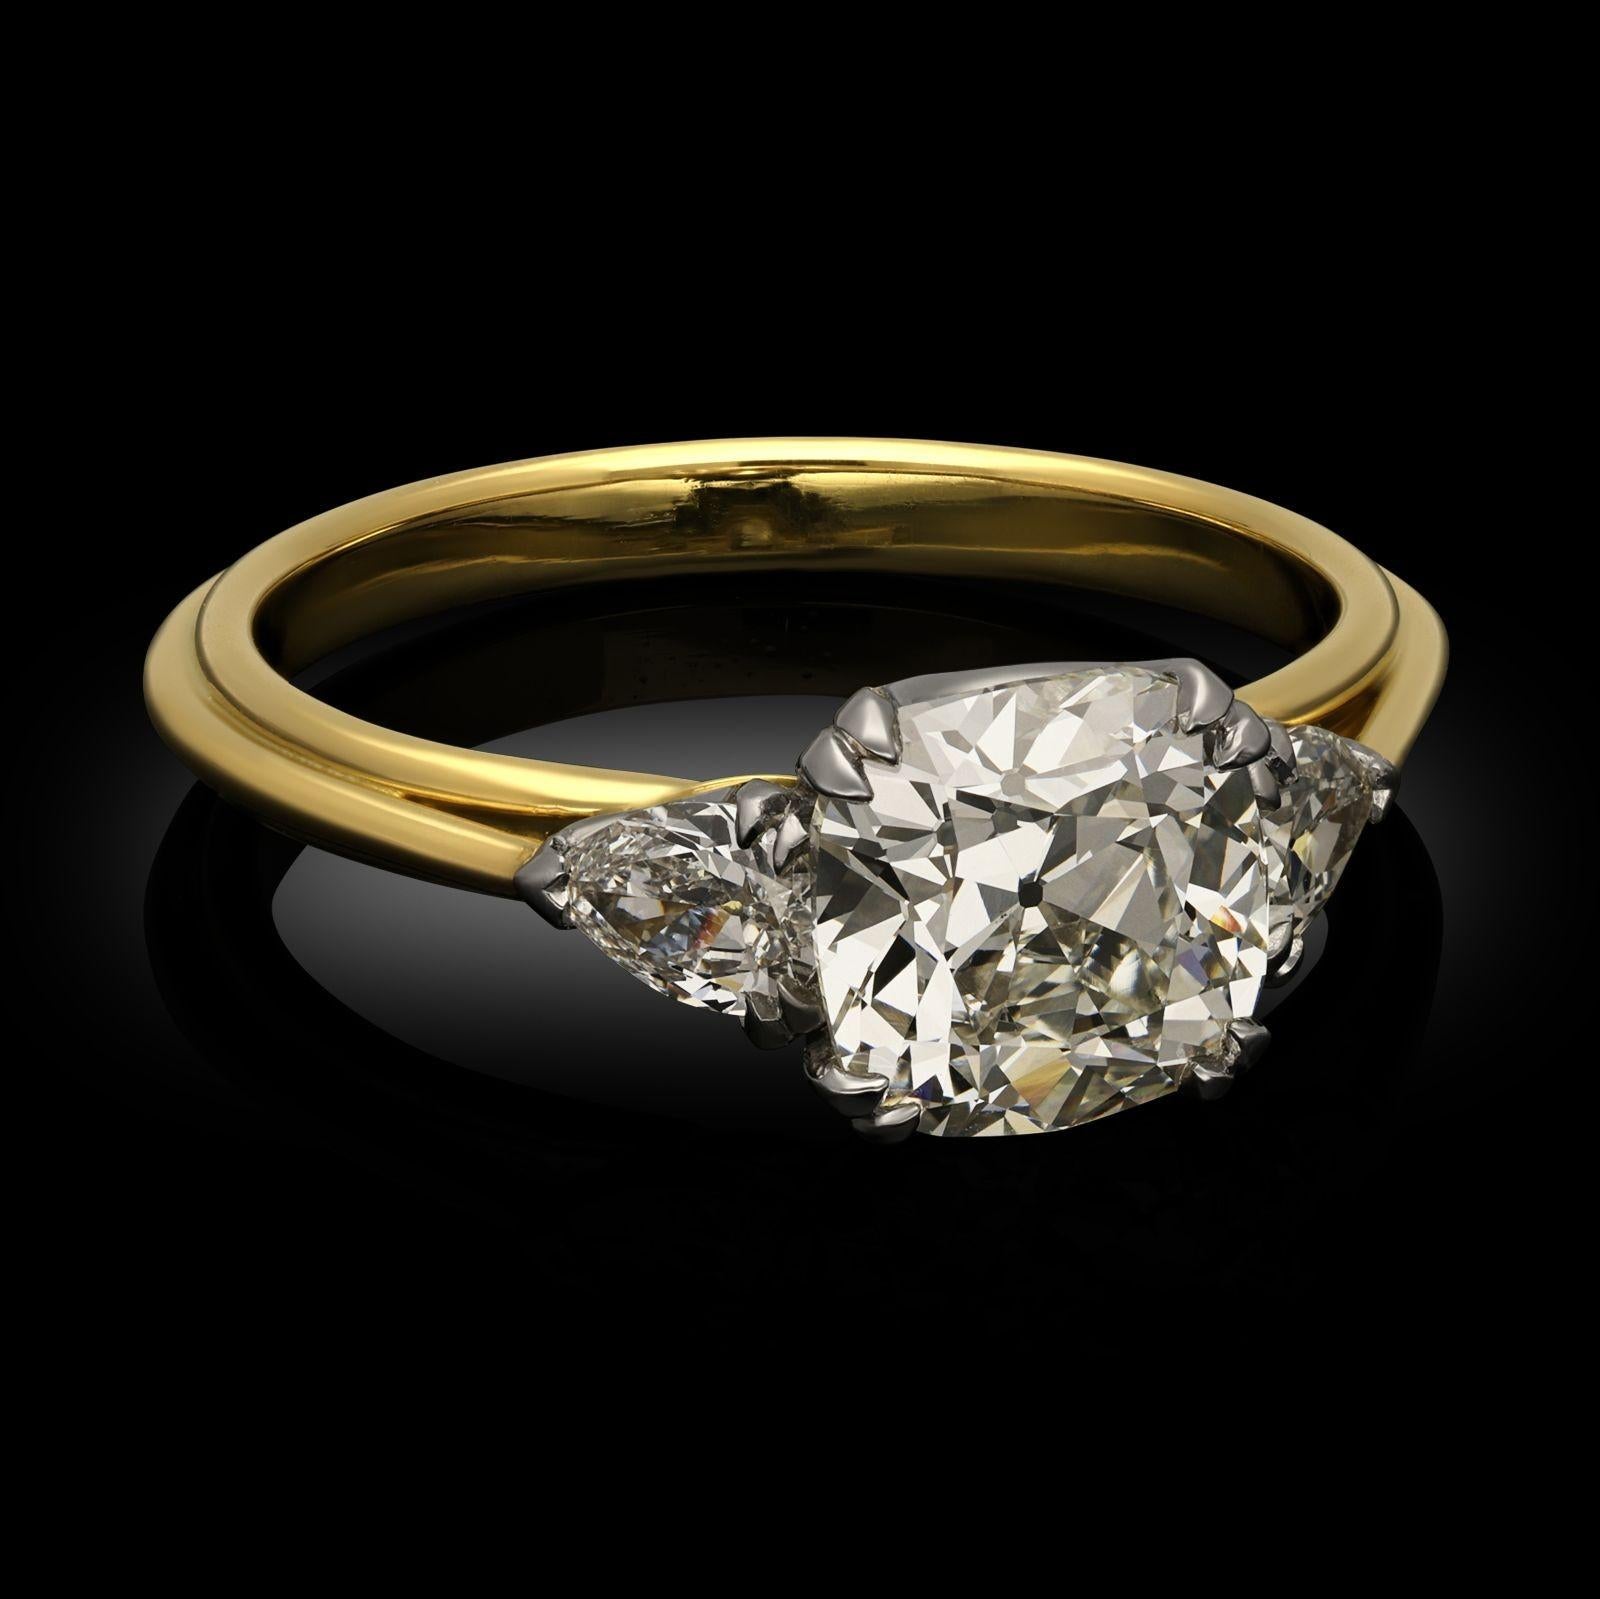 Taille vieille mine Hancocks 1.65ct Old Mine Cushion Cut Diamond and 18ct Yellow Gold Ring (Bague en or jaune 18ct) en vente